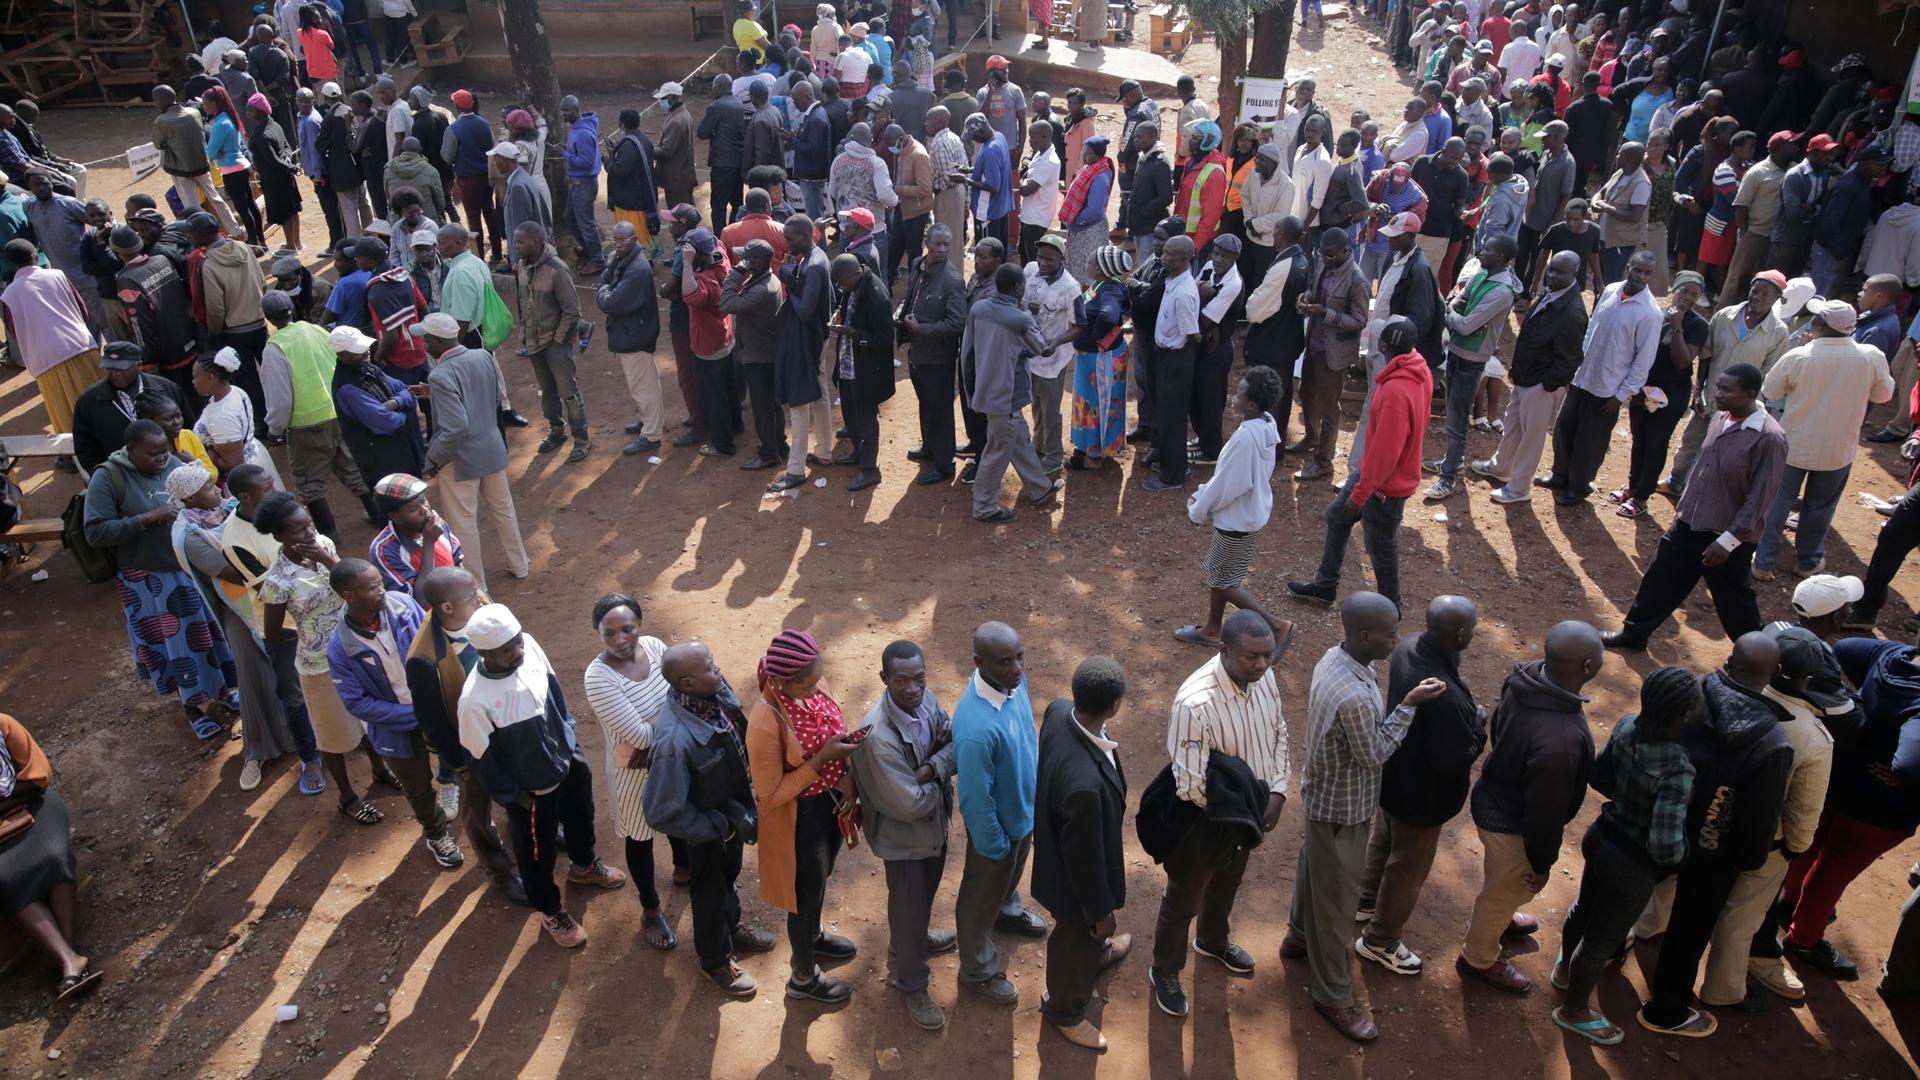 People line up to cast their vote in Kenya's general election in Eldoret, Kenya, Tuesday Aug. 9, 2022. Kenyans are voting to choose between opposition leader Raila Odinga Deputy President William Ruto to succeed President Uhuru Kenyatta after a decade in 